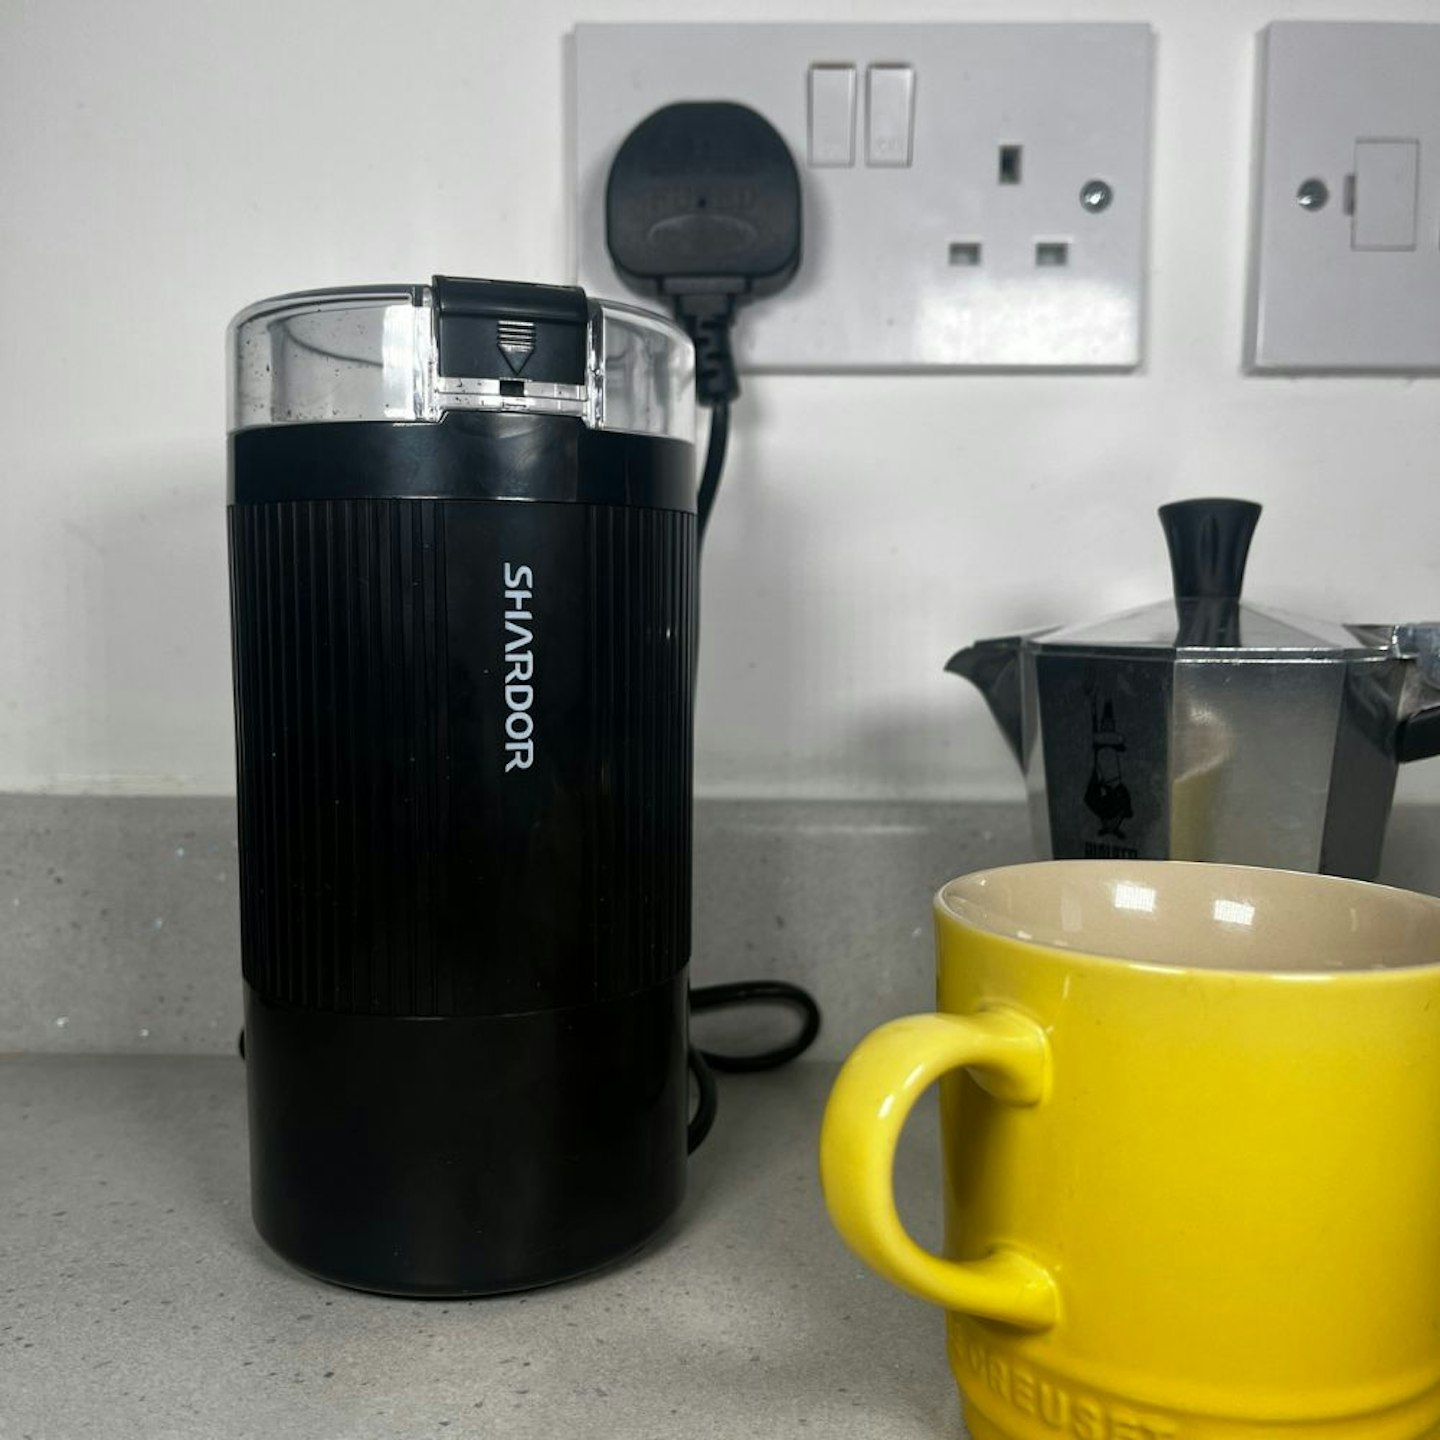 The SHARDOR Electric Coffee Grinder on test, a yellow mug sits next to it.